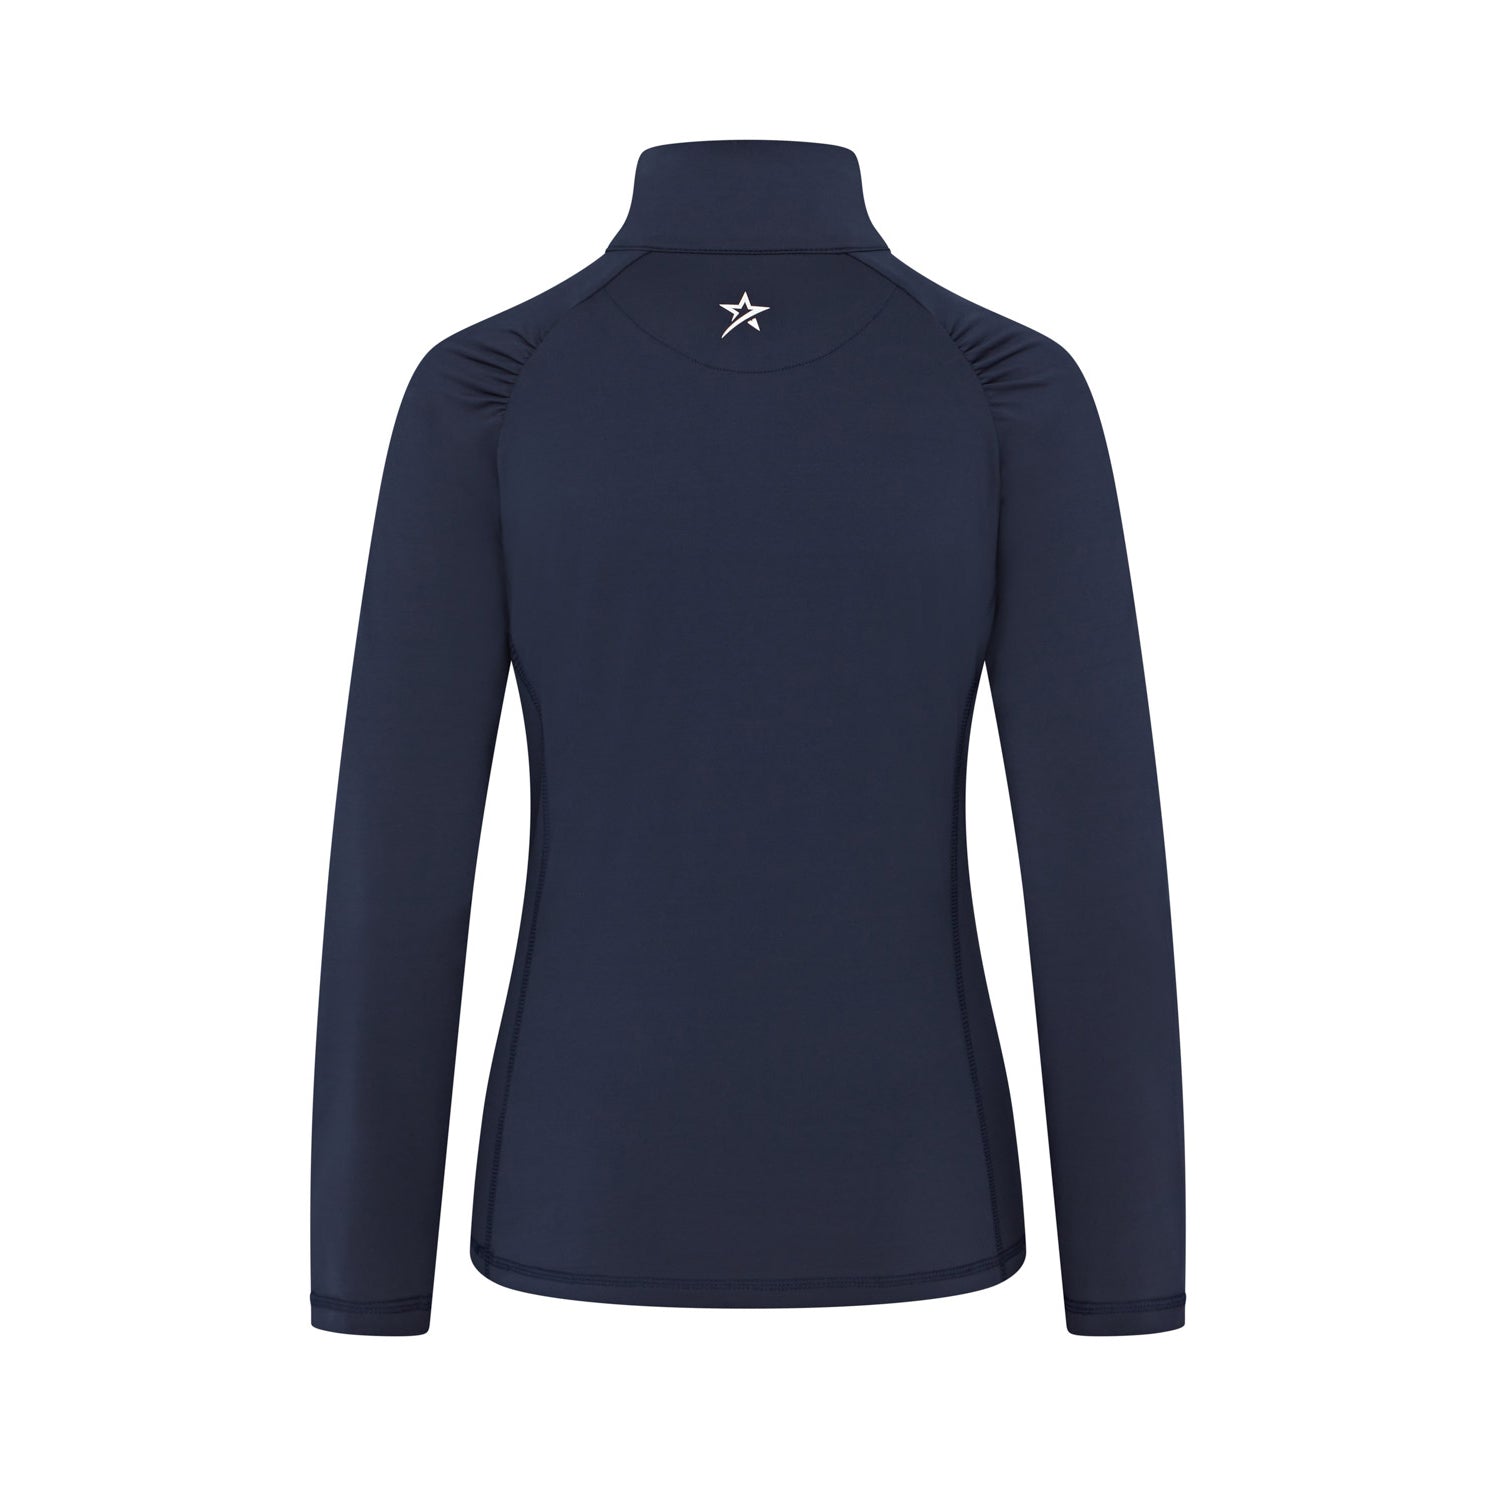 Swing Out Sister Women's Zip-Neck Top in Navy and Sunshine